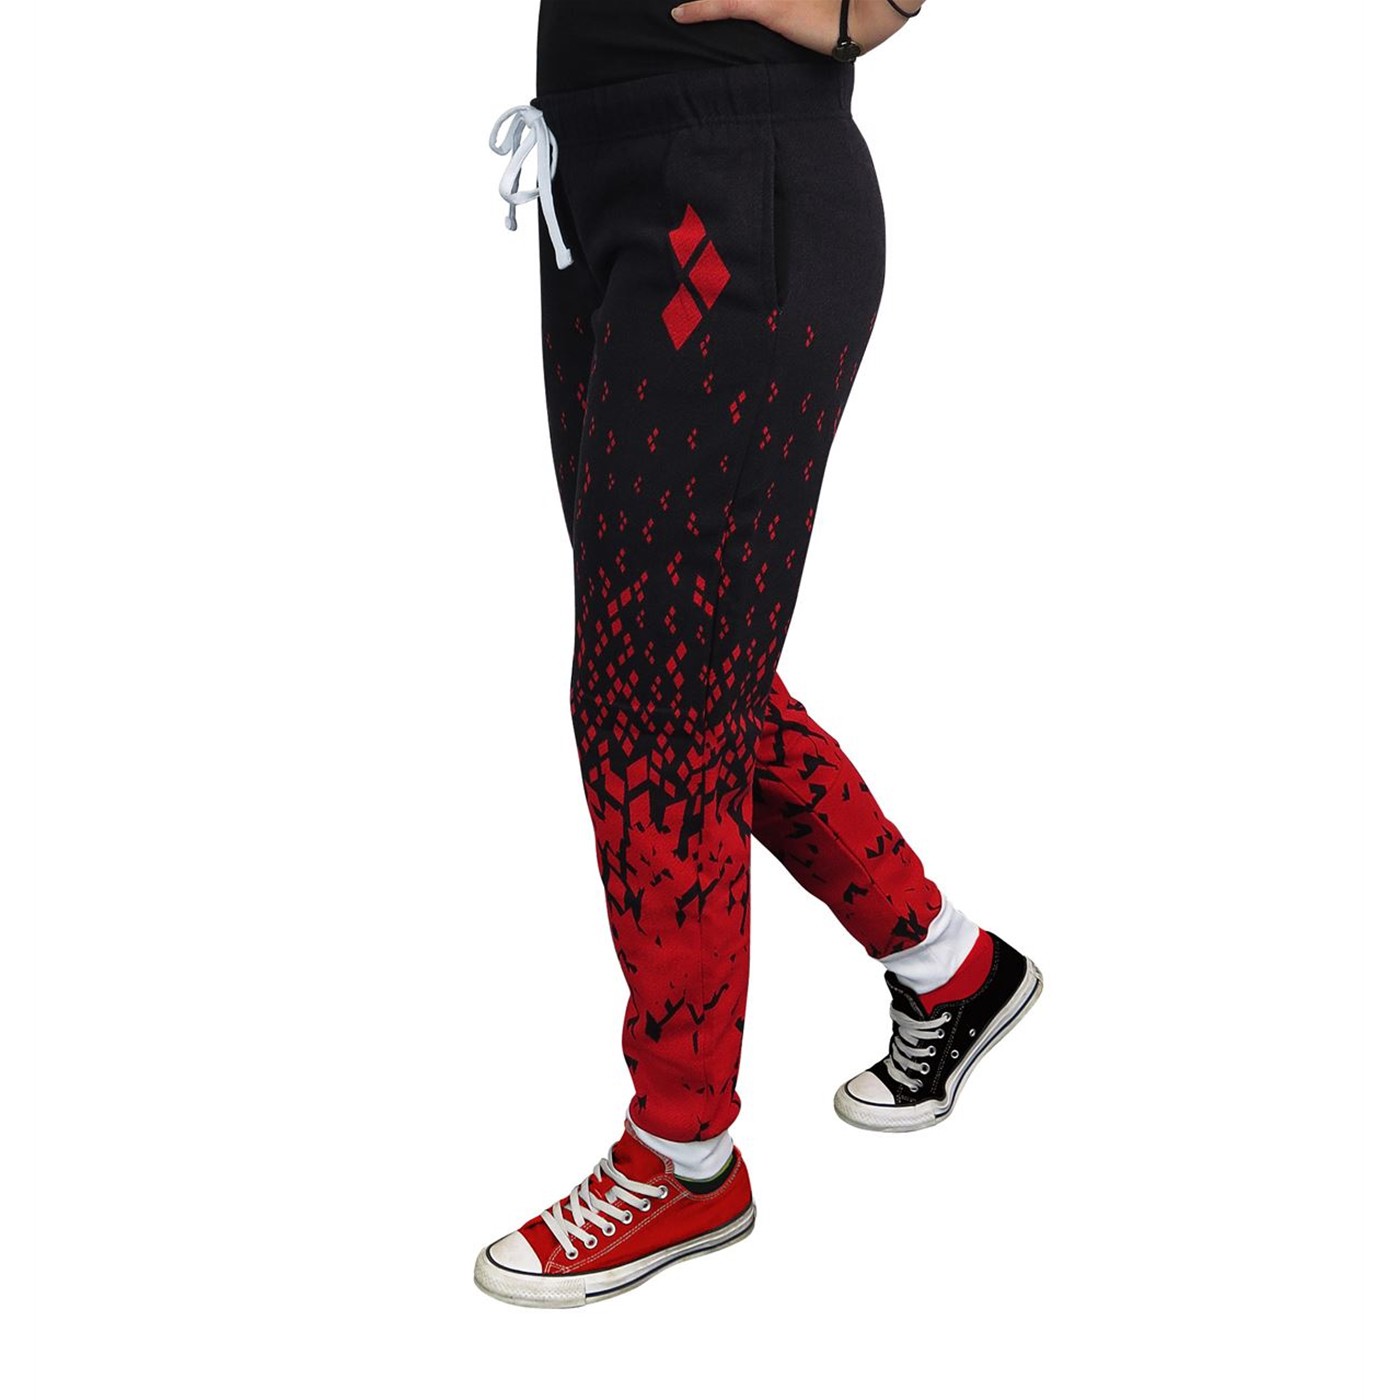 OFFICIAL DC Comics The Suicide Squad Harley Quinn Leggings *Size Large*  #GNDOT | eBay